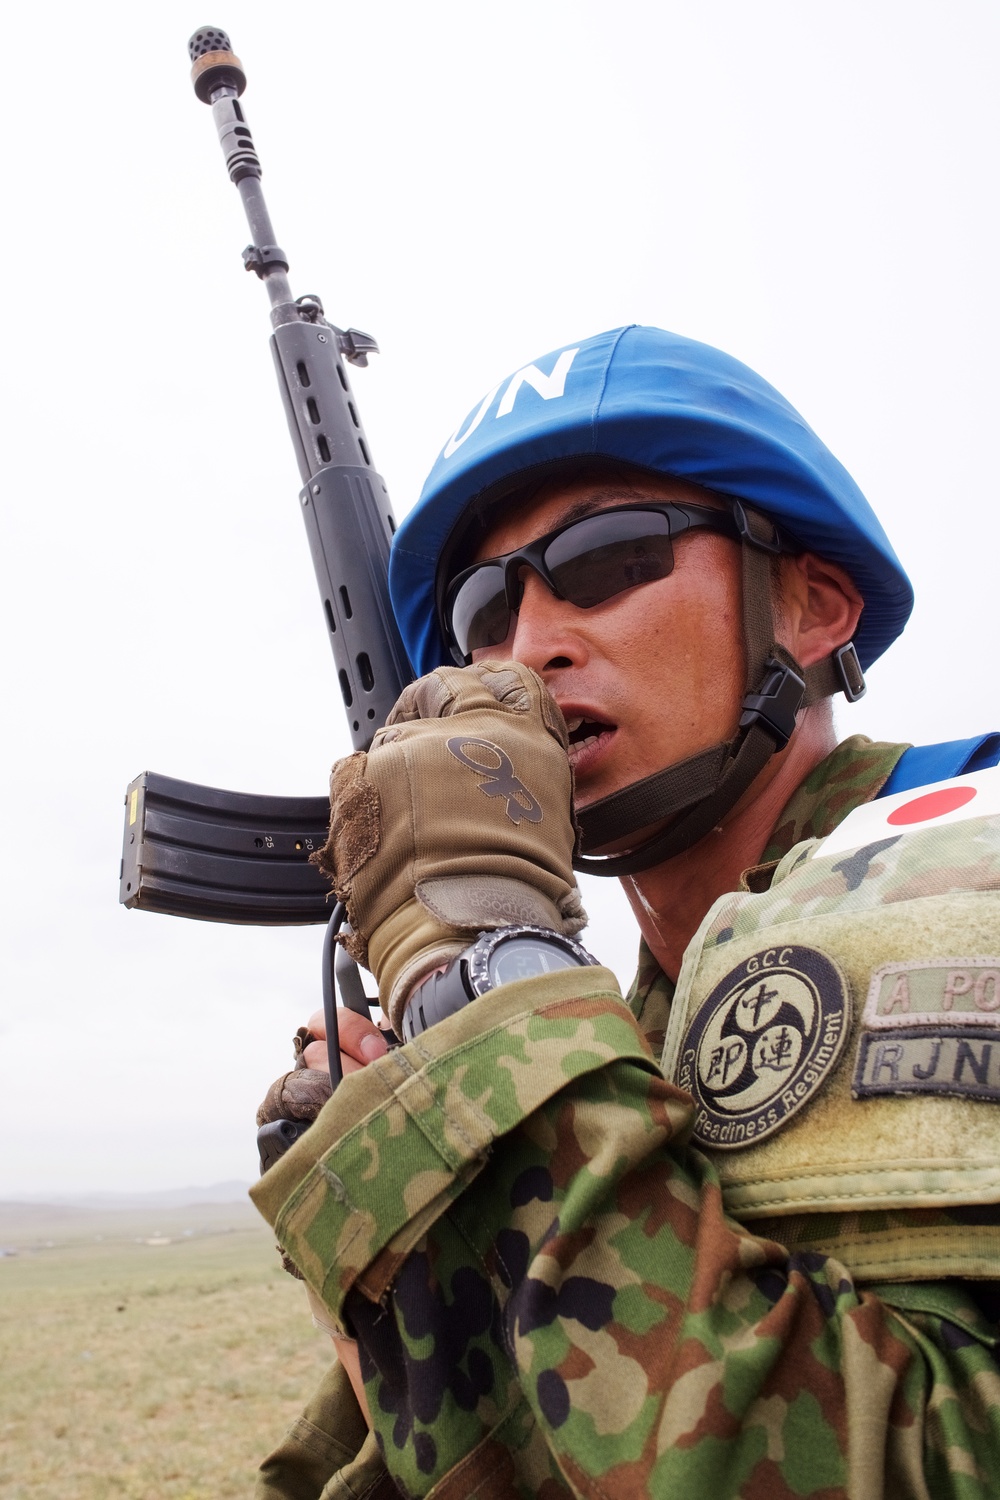 Japan Ground Self-Defense Force soldiers train for UN patrolling in Mongolia